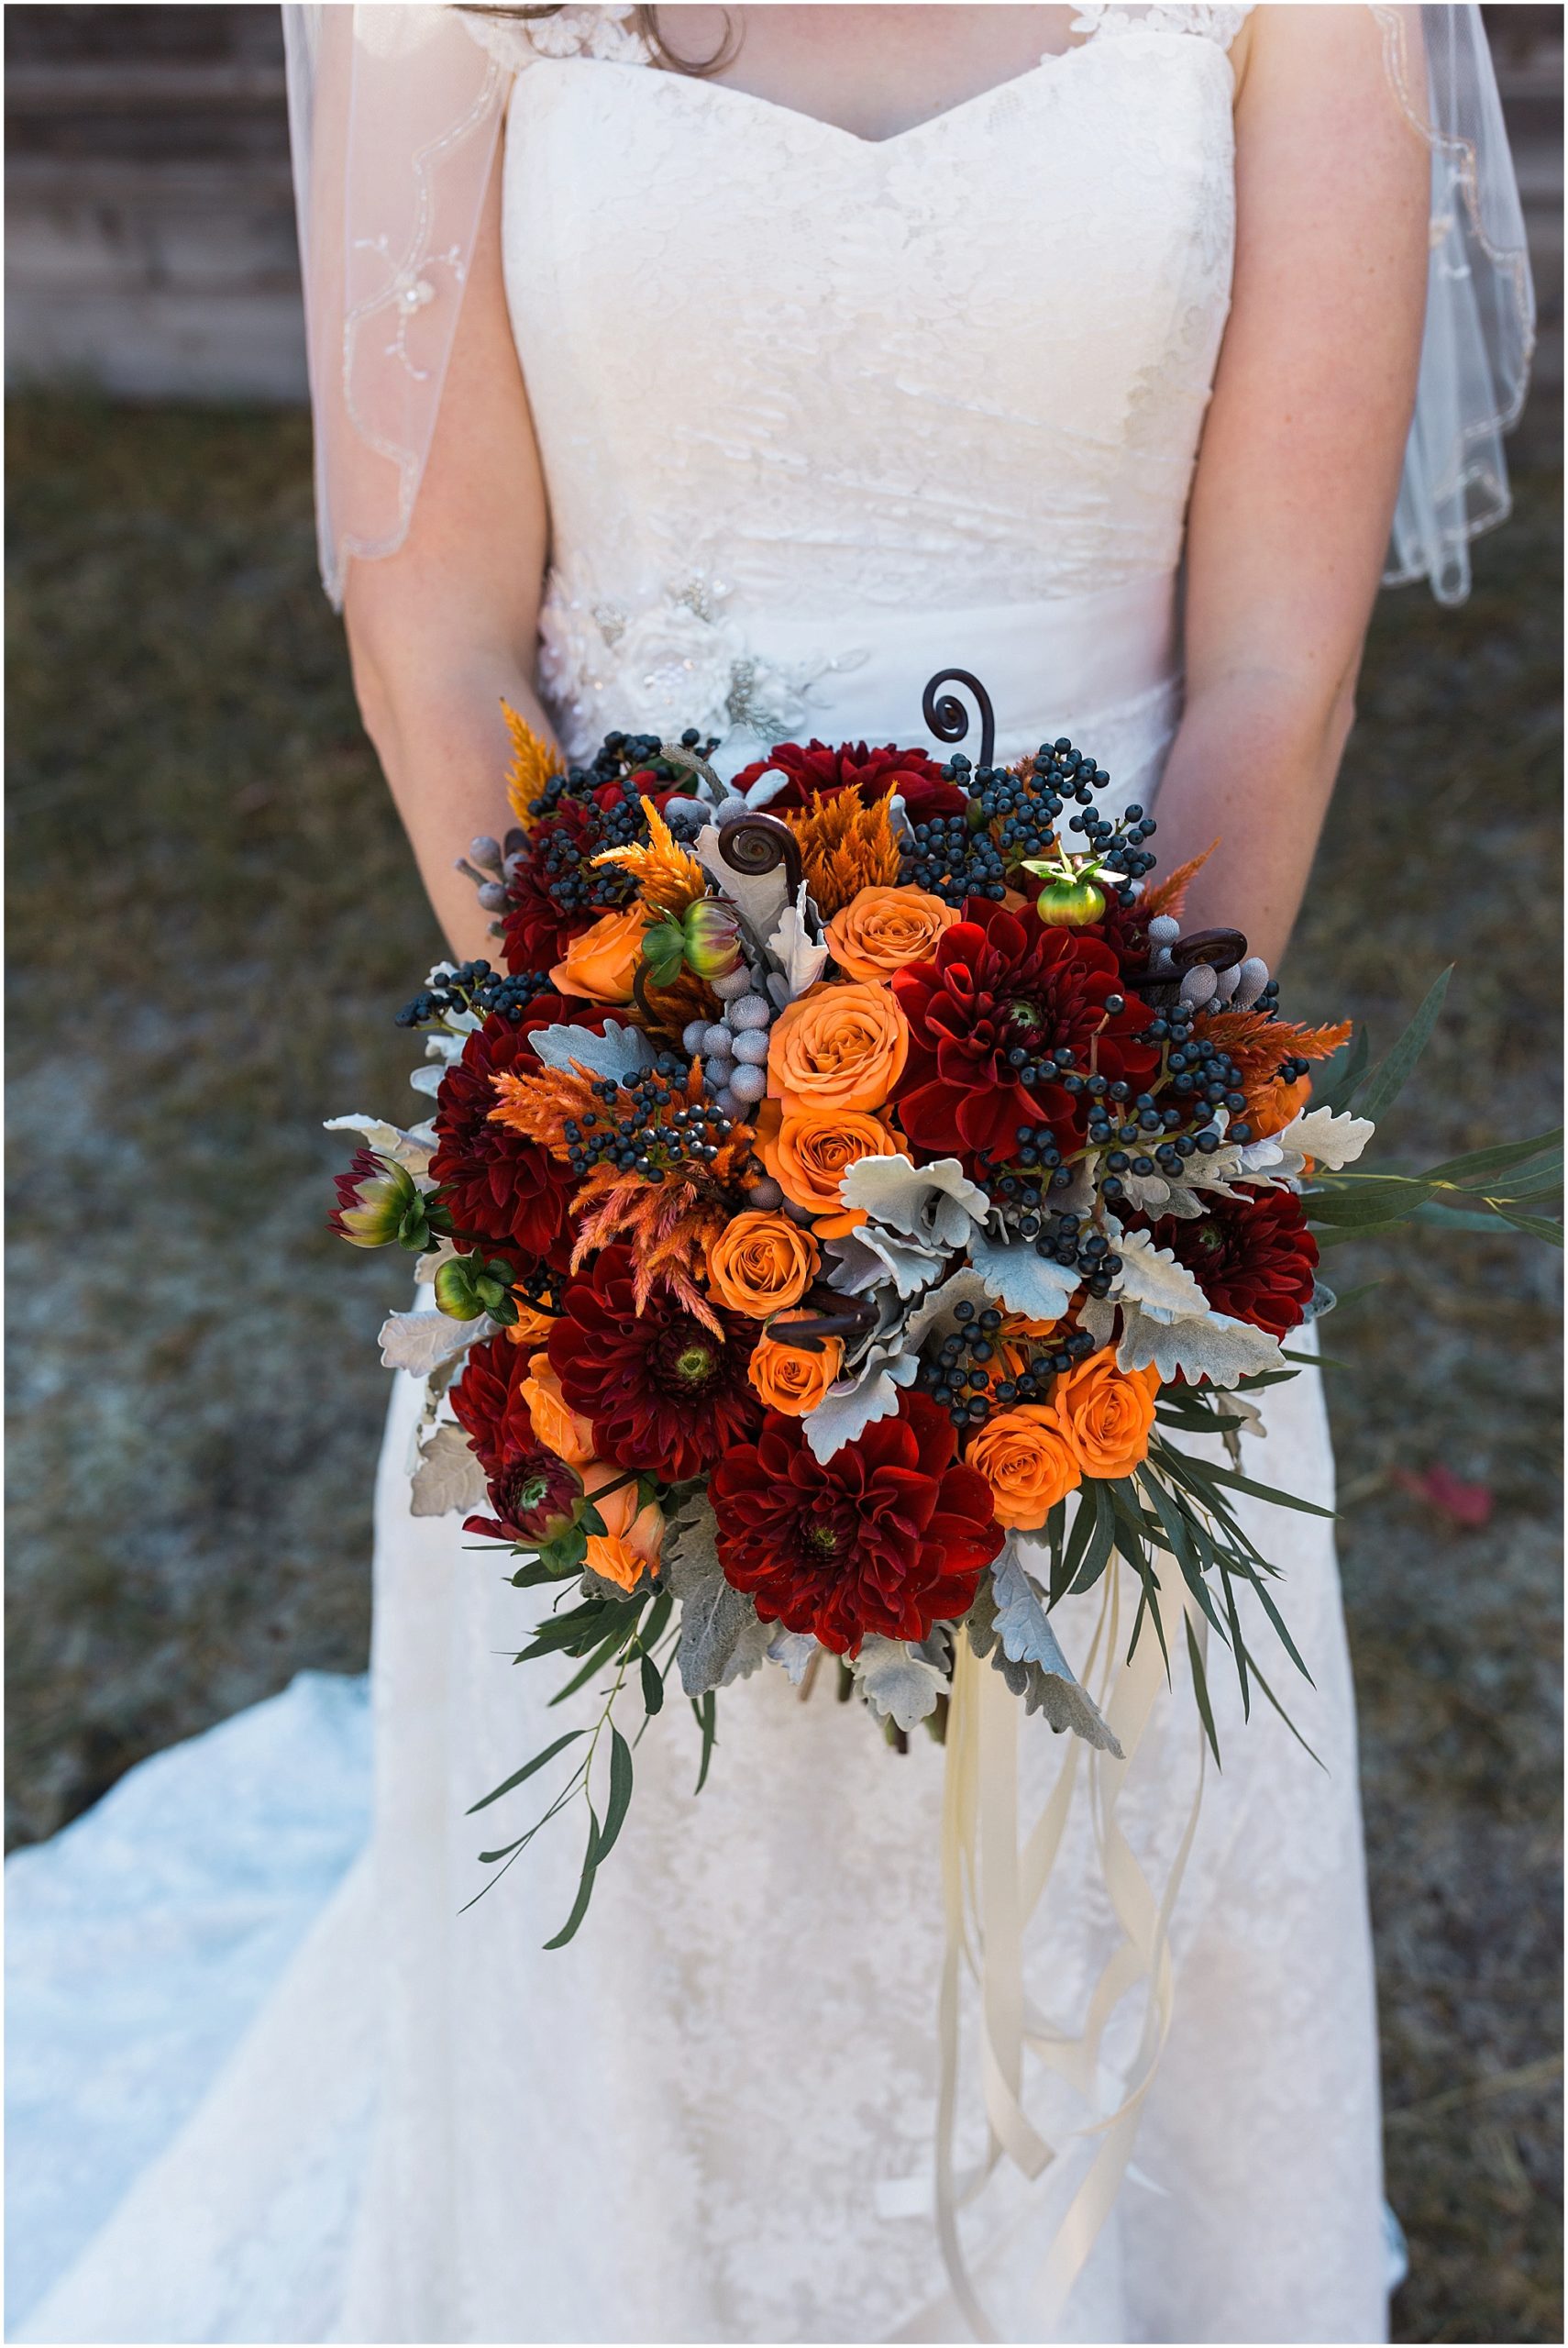 A stunning bouquet in rich oranges and reds created by Cascade Garden Florist in Bend, OR. | Erica Swantek Photography